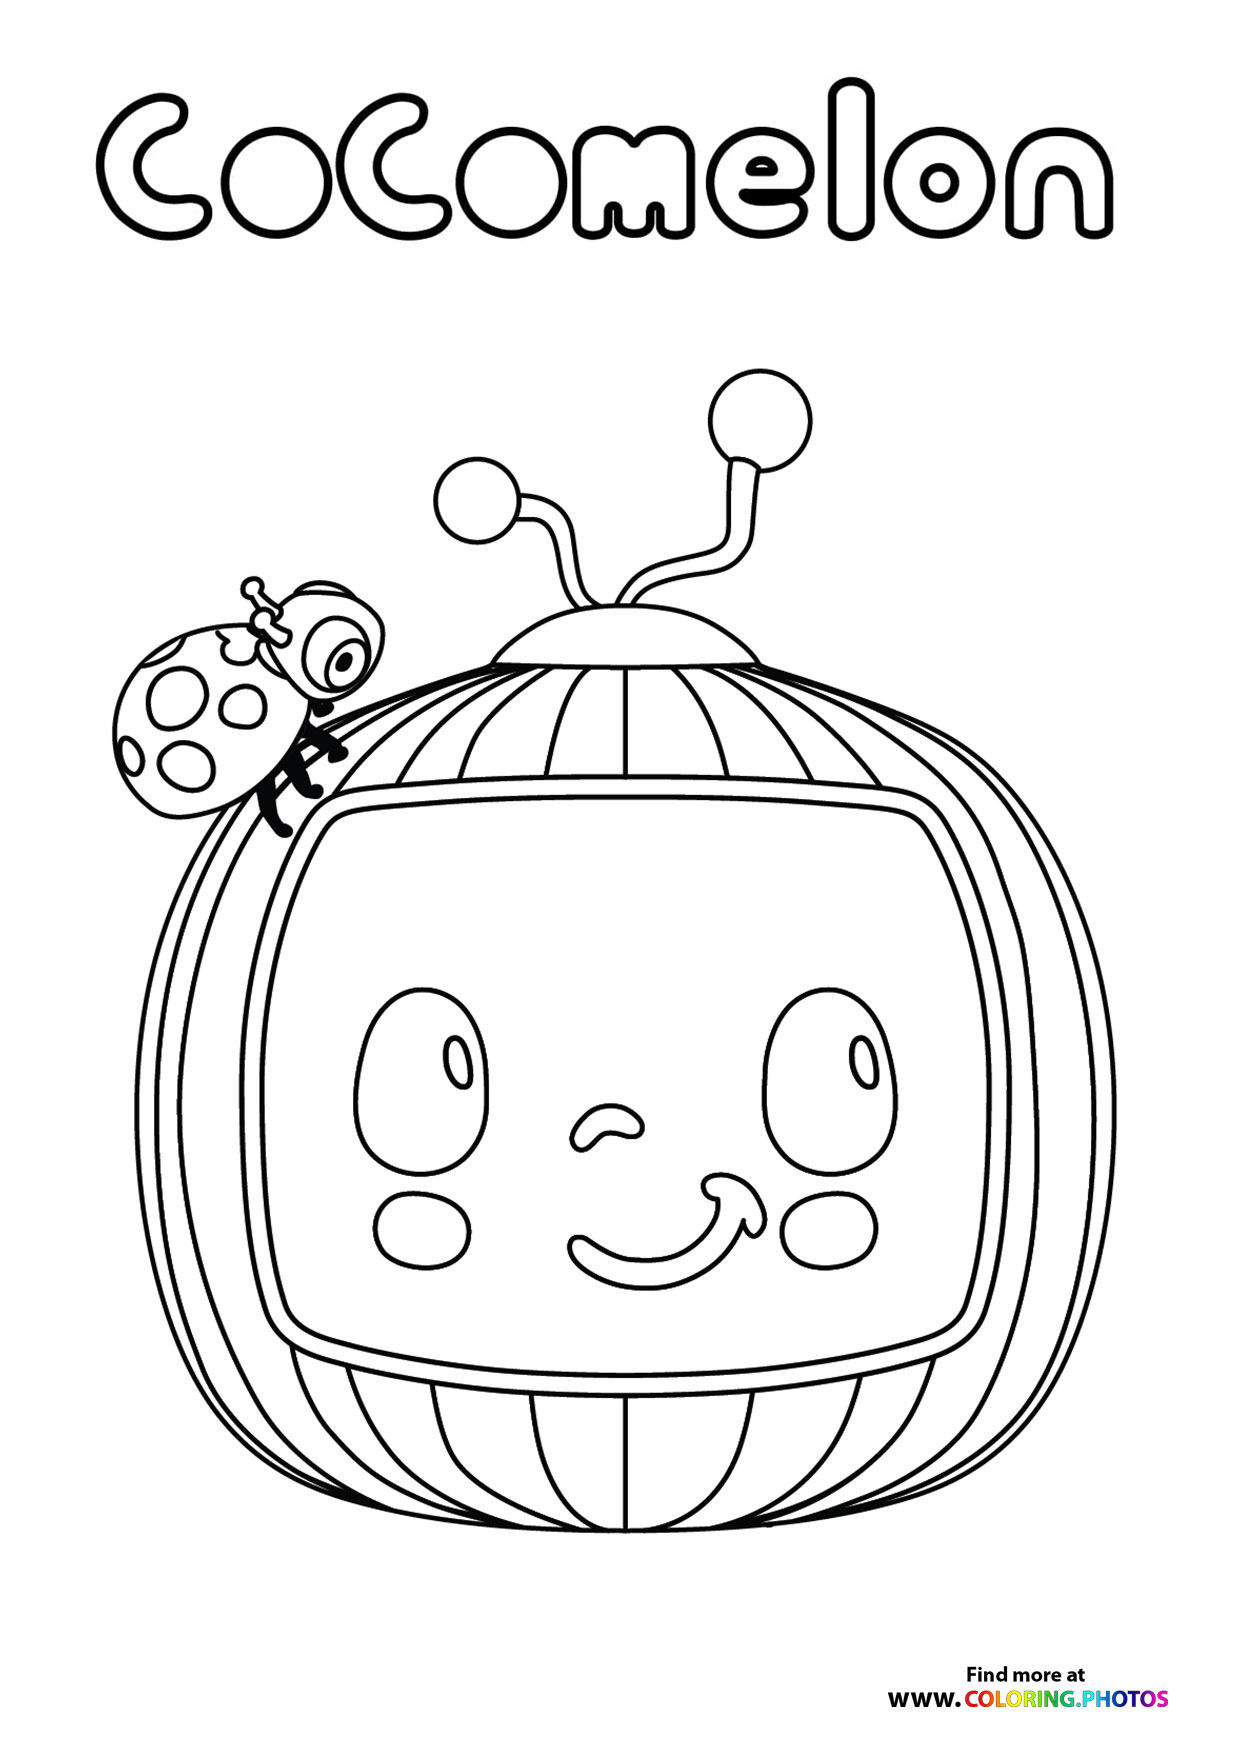 CoComelon coloring pages   Free print or download of CoComelon sheets.